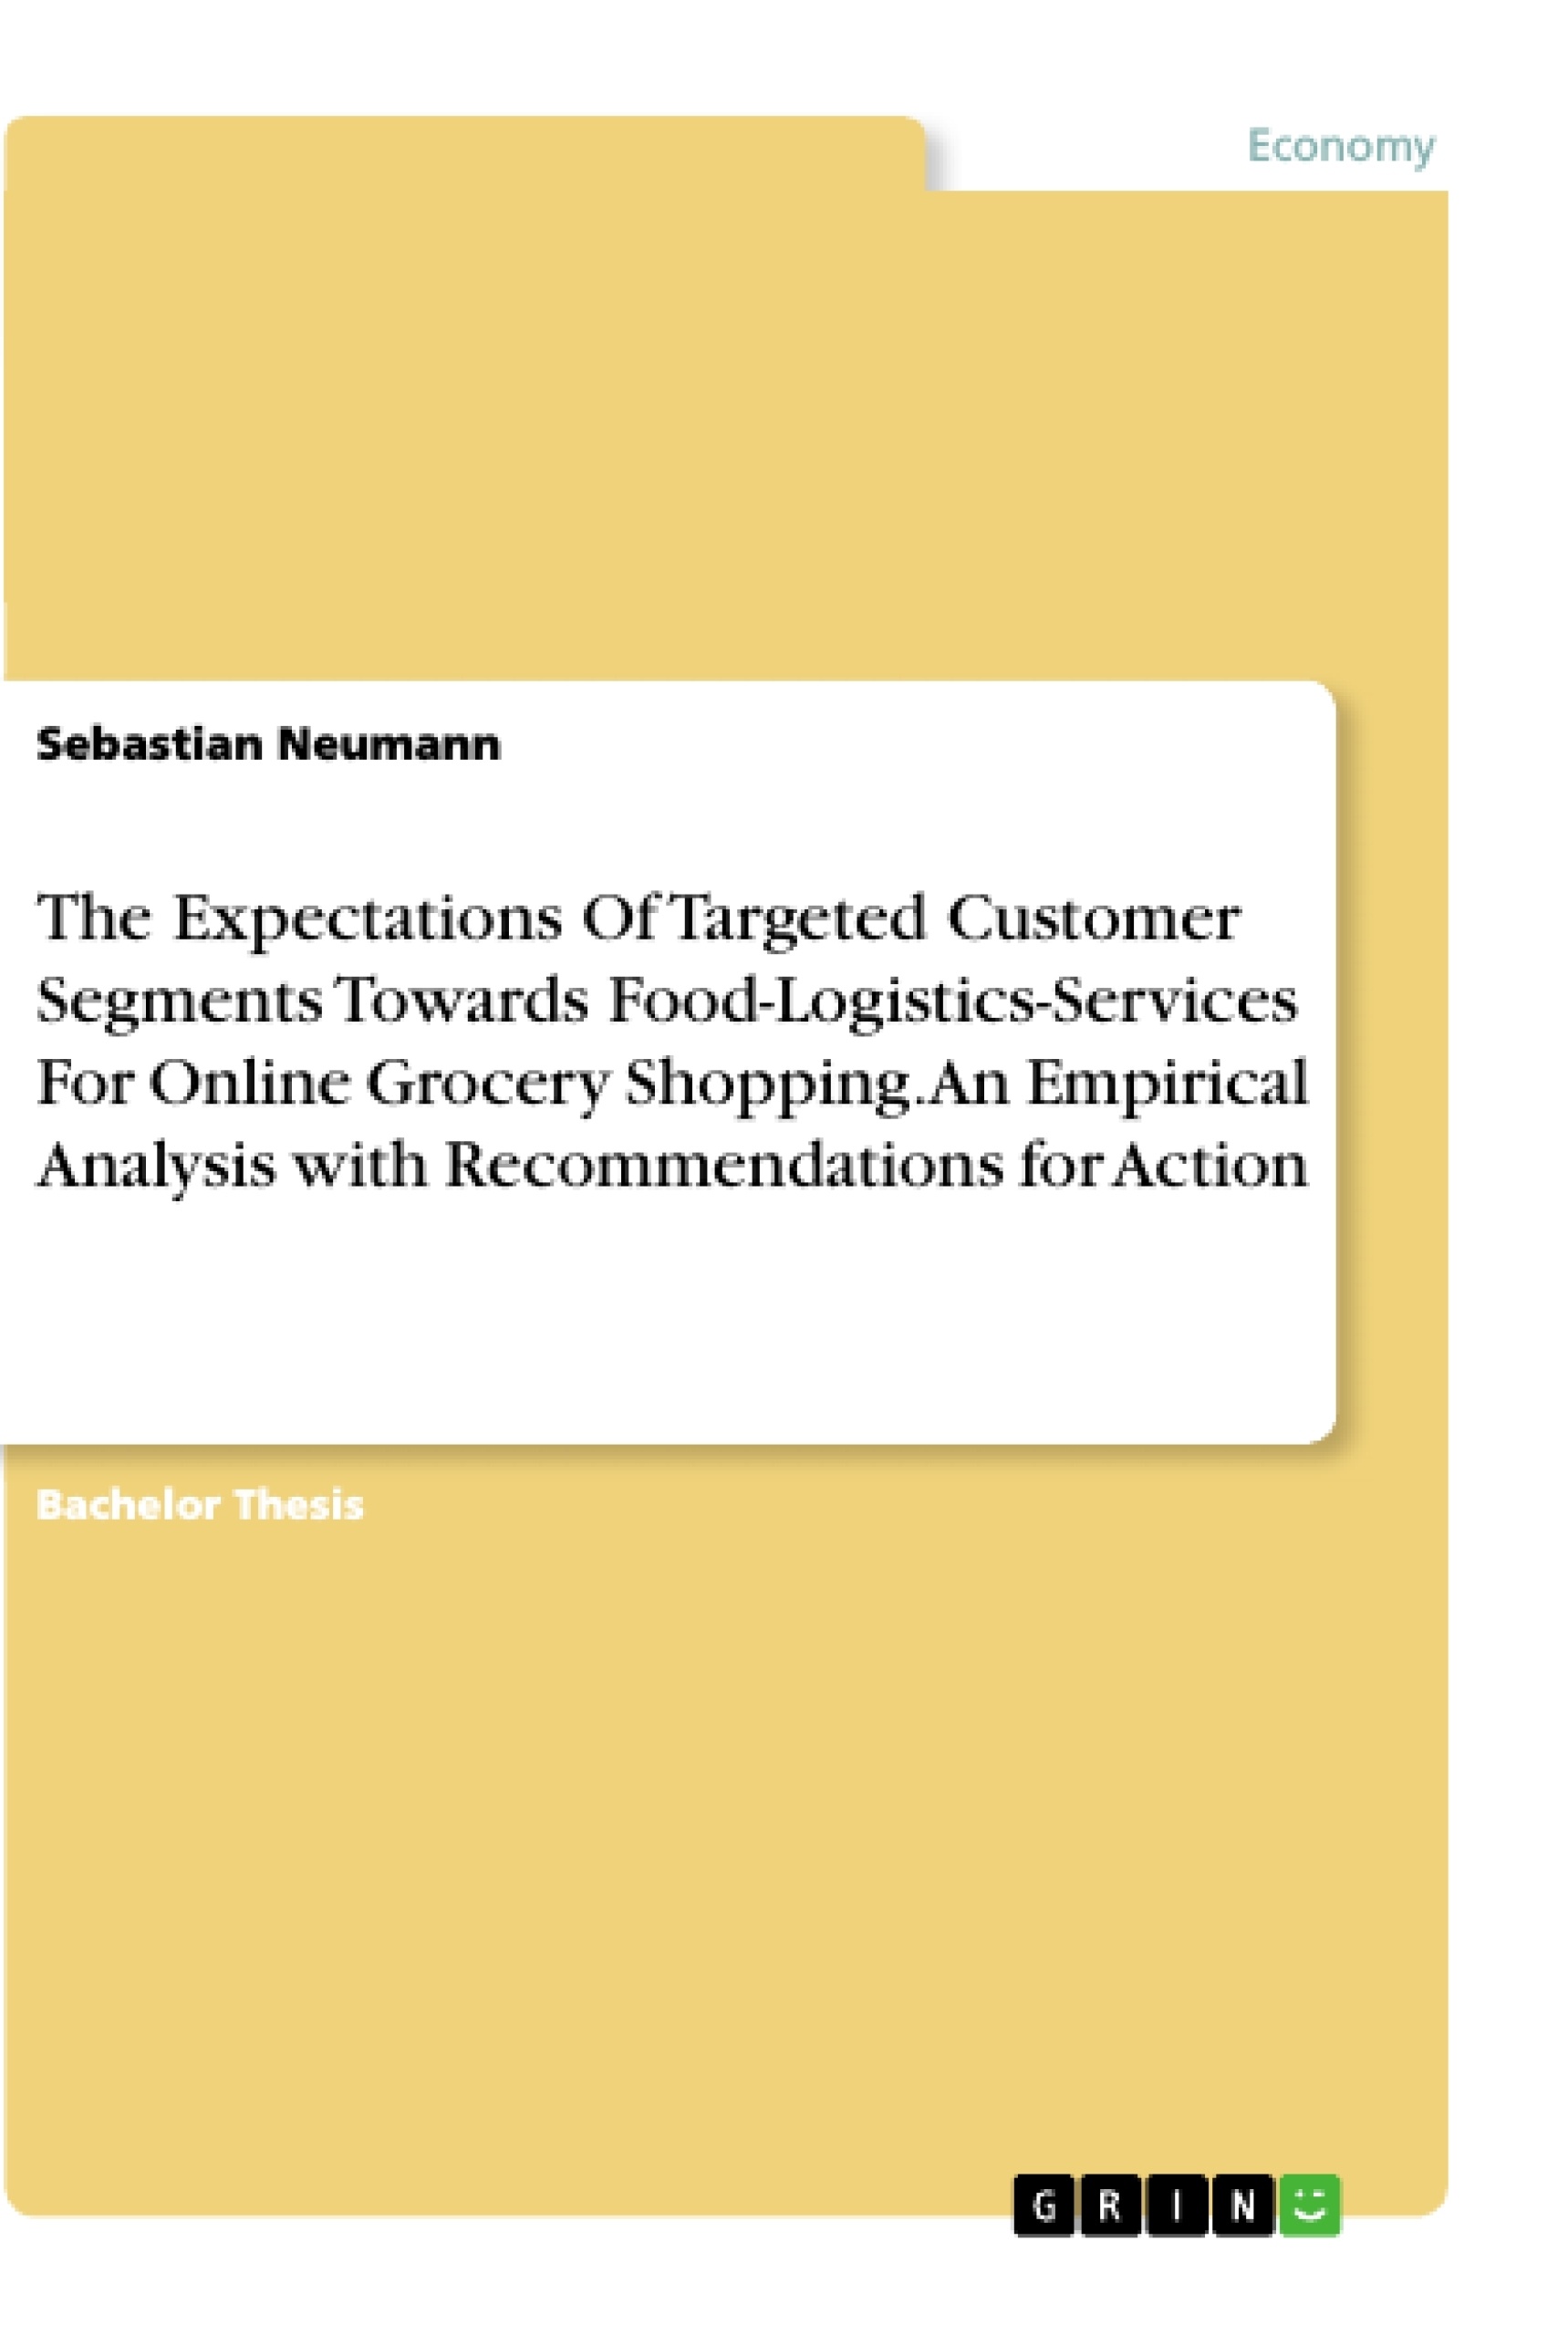 Title: The Expectations Of Targeted Customer Segments Towards Food-Logistics-Services For Online Grocery Shopping. An Empirical Analysis with Recommendations for Action